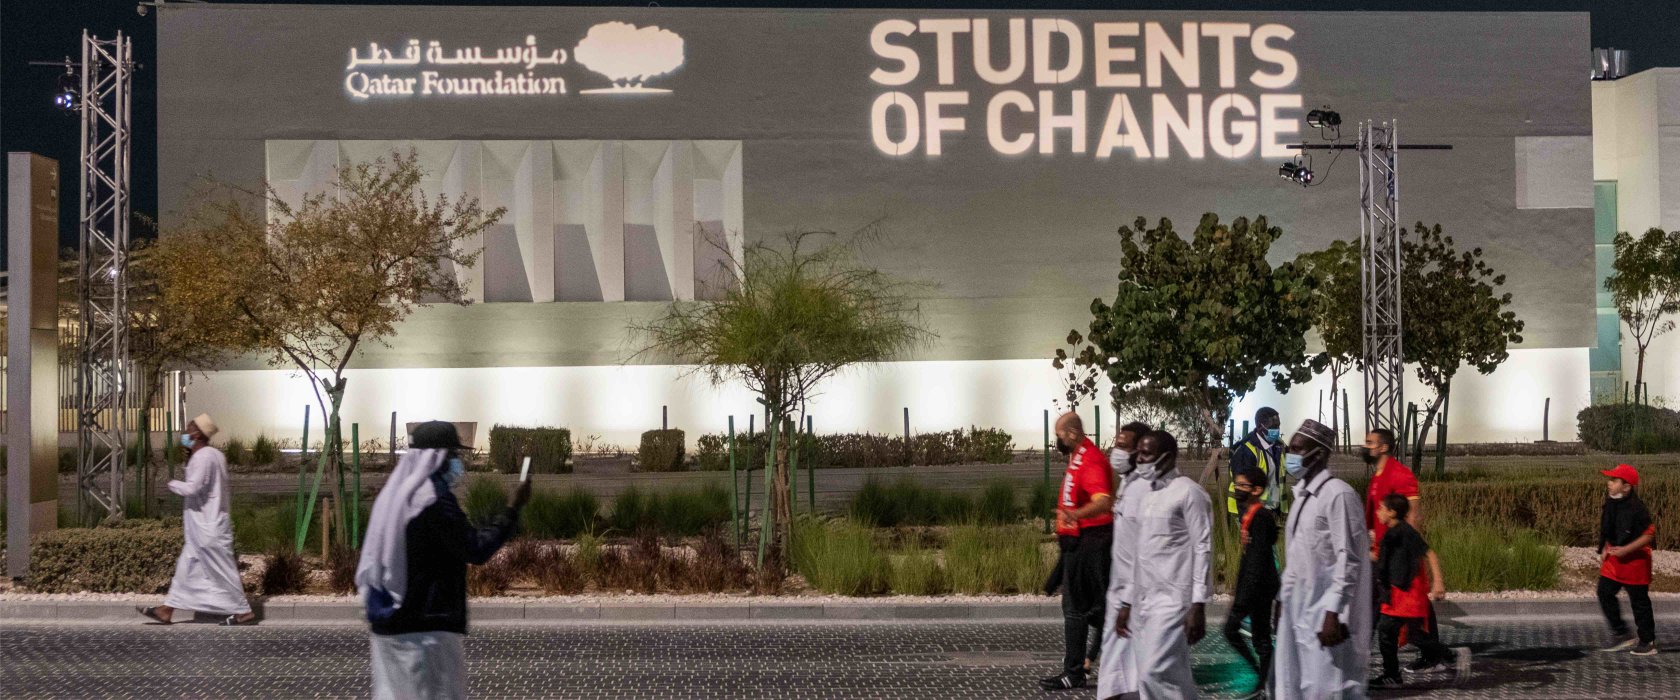 QF inspires fans to be Students of Change at the FIFA Club World Cup Qatar 2020™